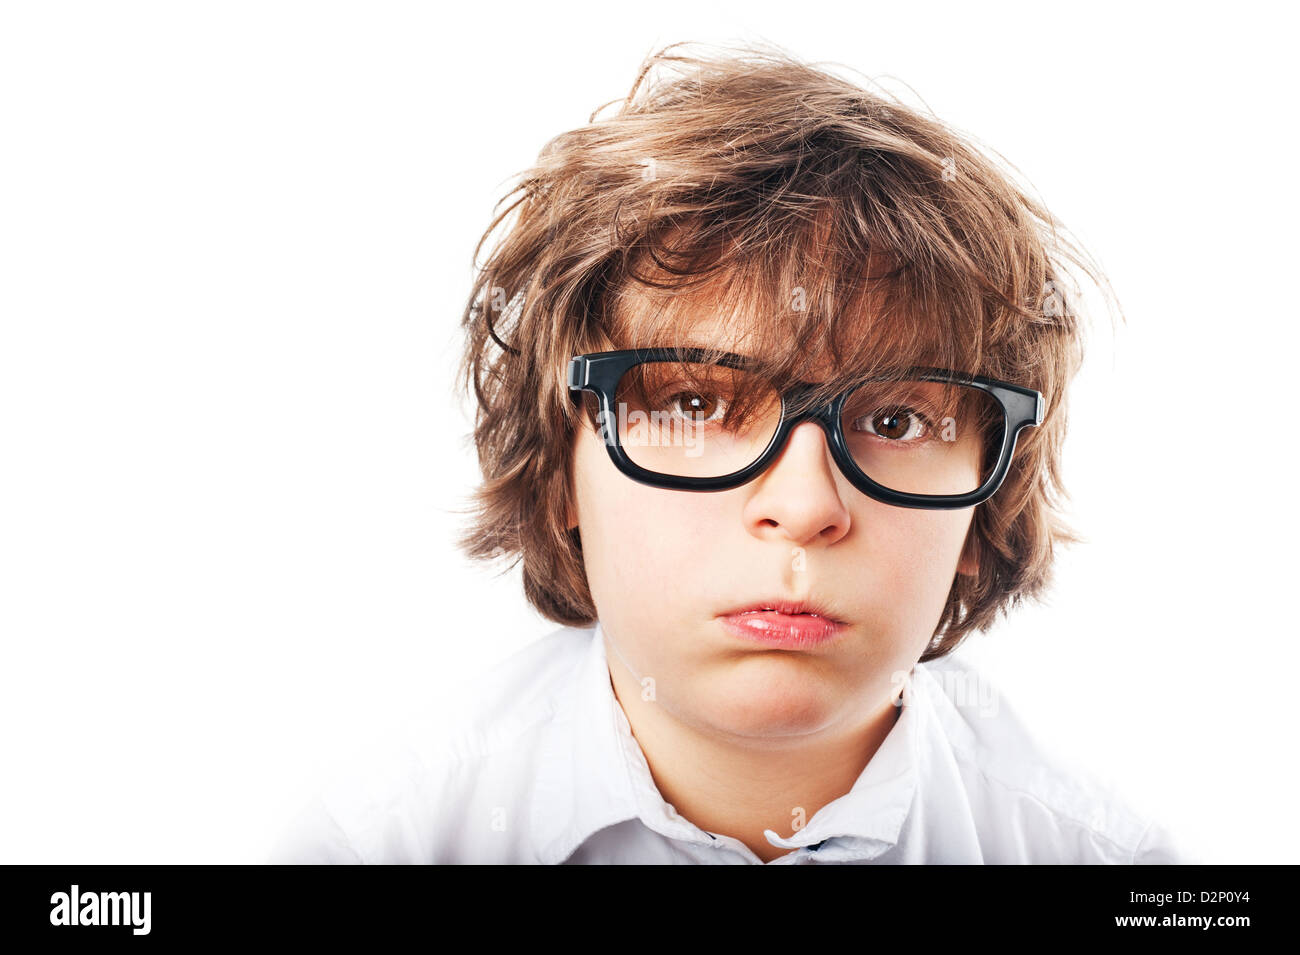 white boy with shaggy hair, a white shirt and fashion glasses, tired  looking at the camera Stock Photo - Alamy